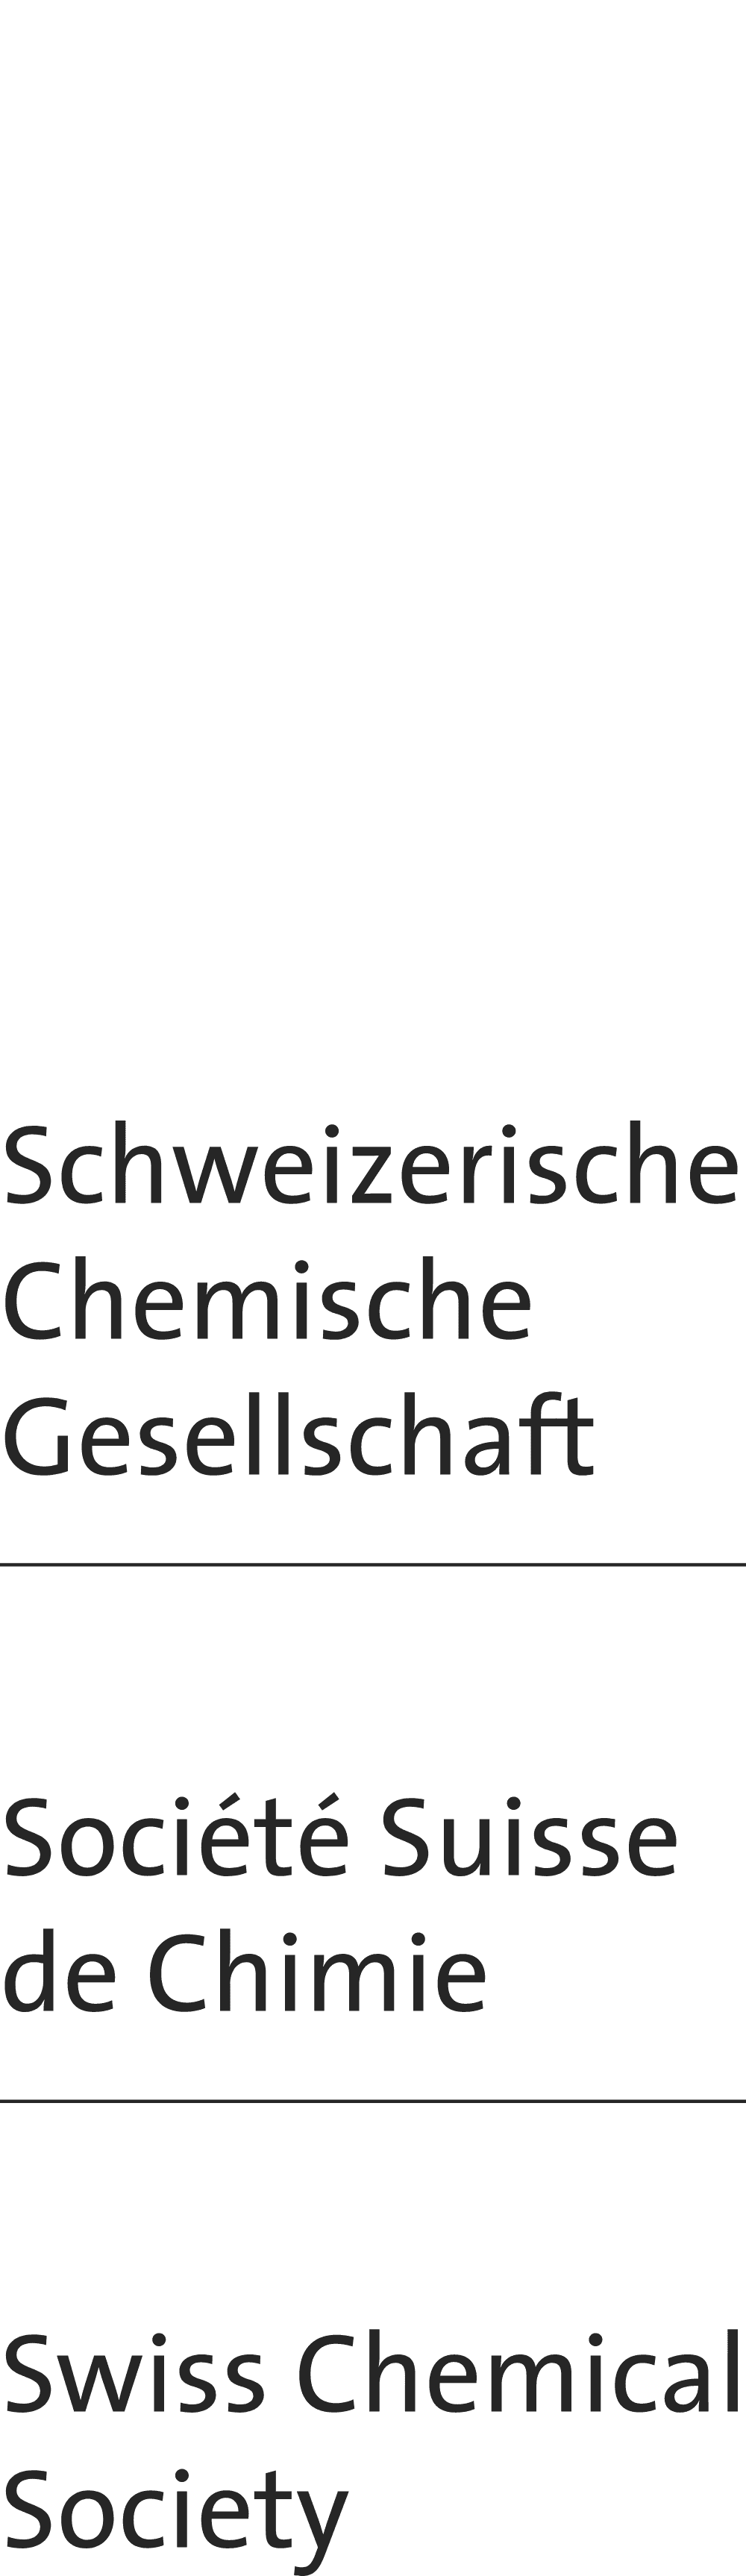 Swiss Chemical Society (SCS) Logo download